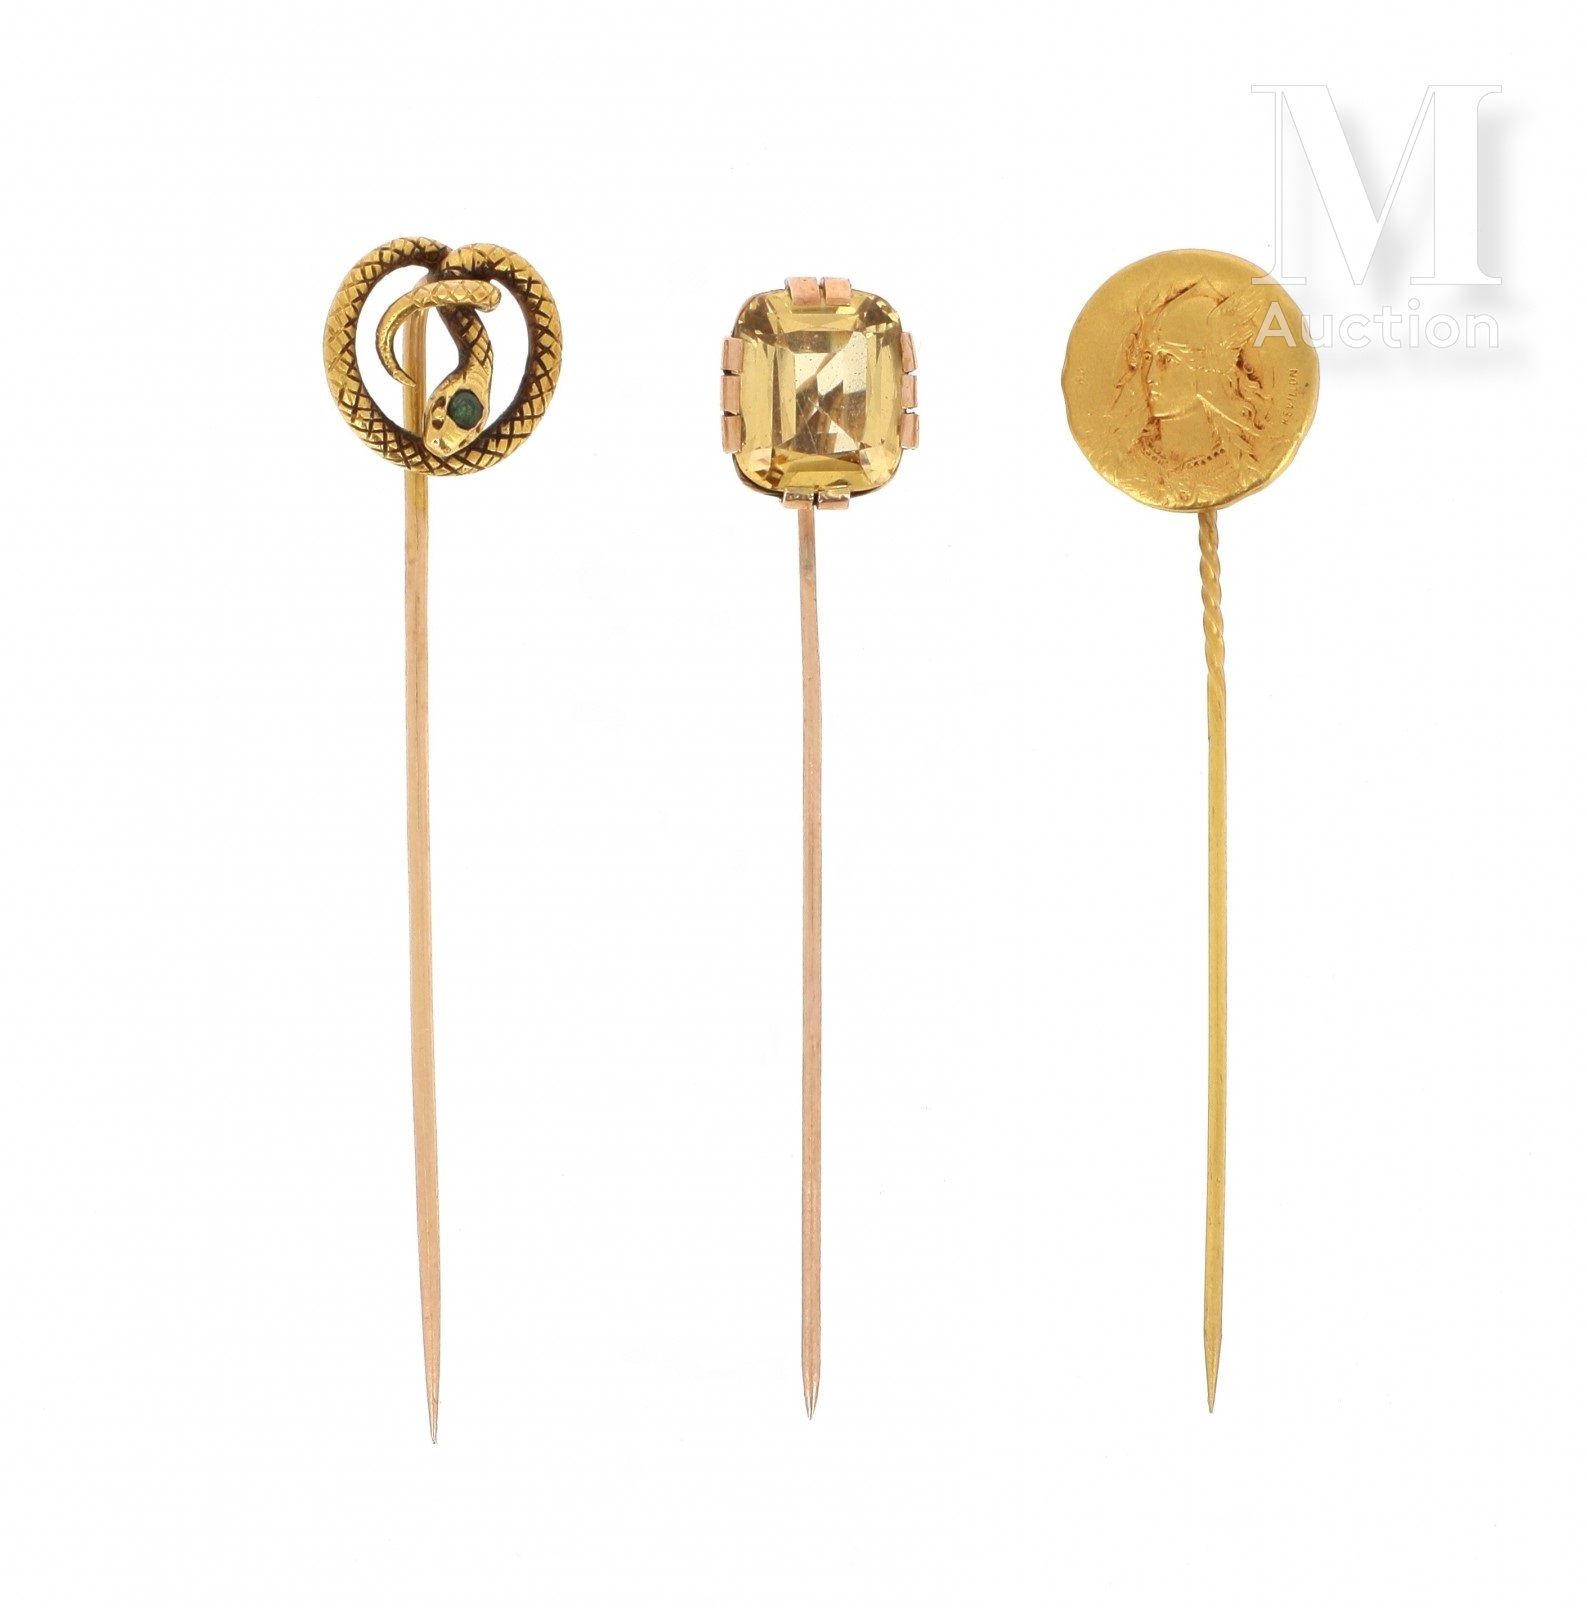 Trois épingles à cravate Lot of three tie pins :

- one in 18 k yellow gold (750&hellip;